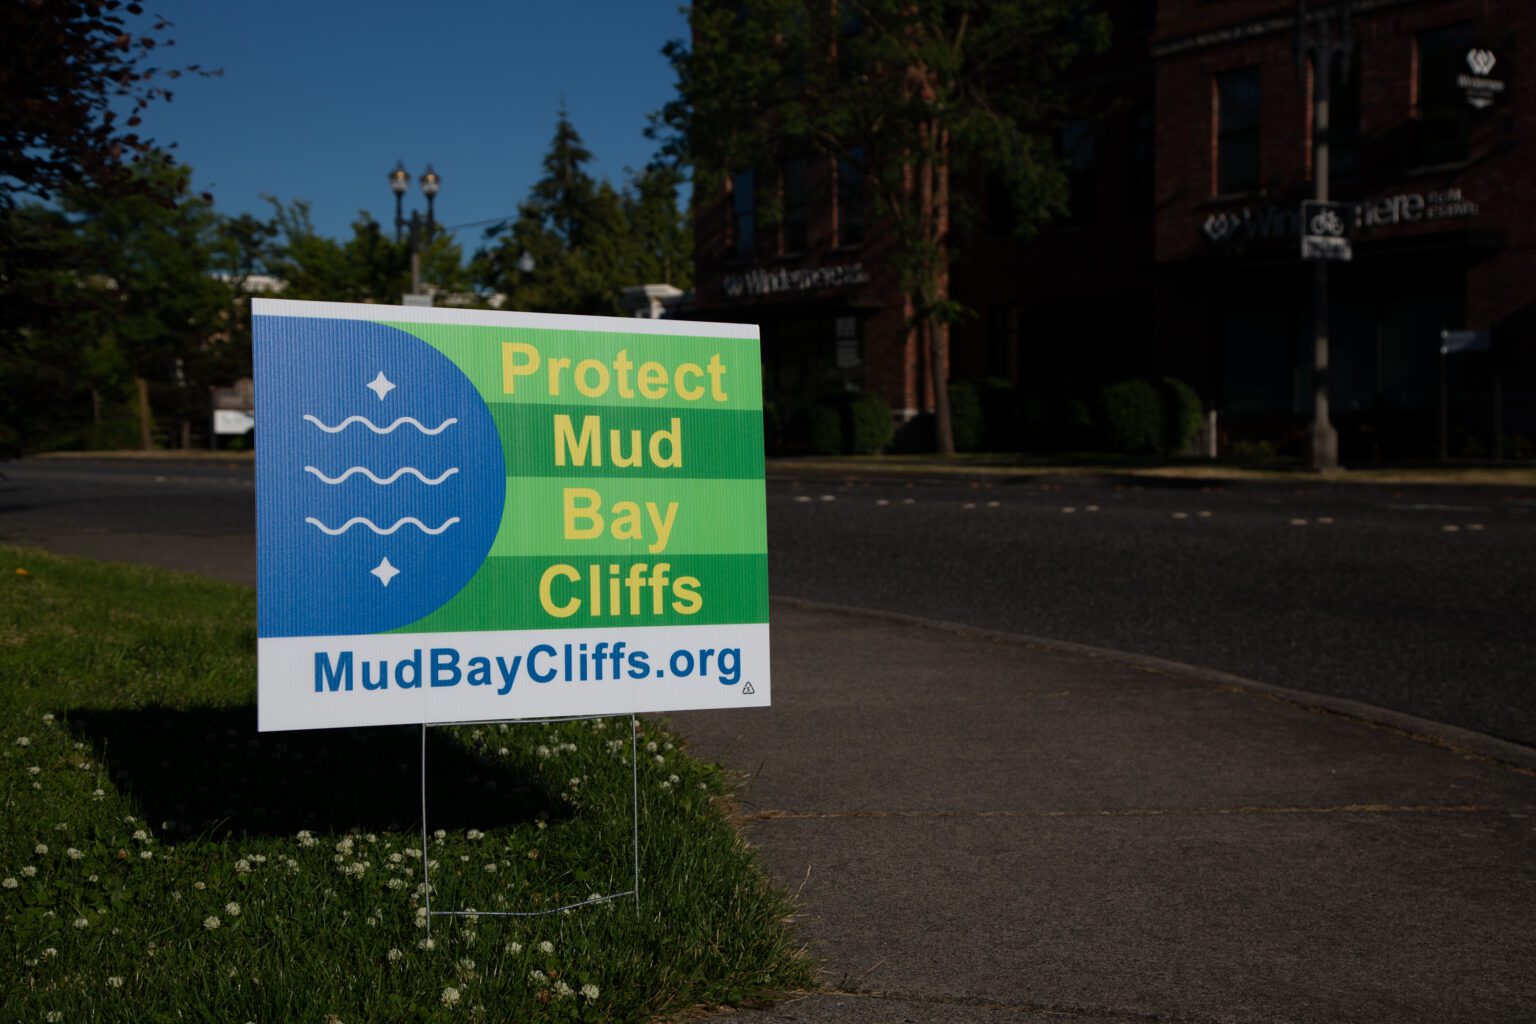 A "Protect Mud Bay Cliffs" sign is posted in Fairhaven.